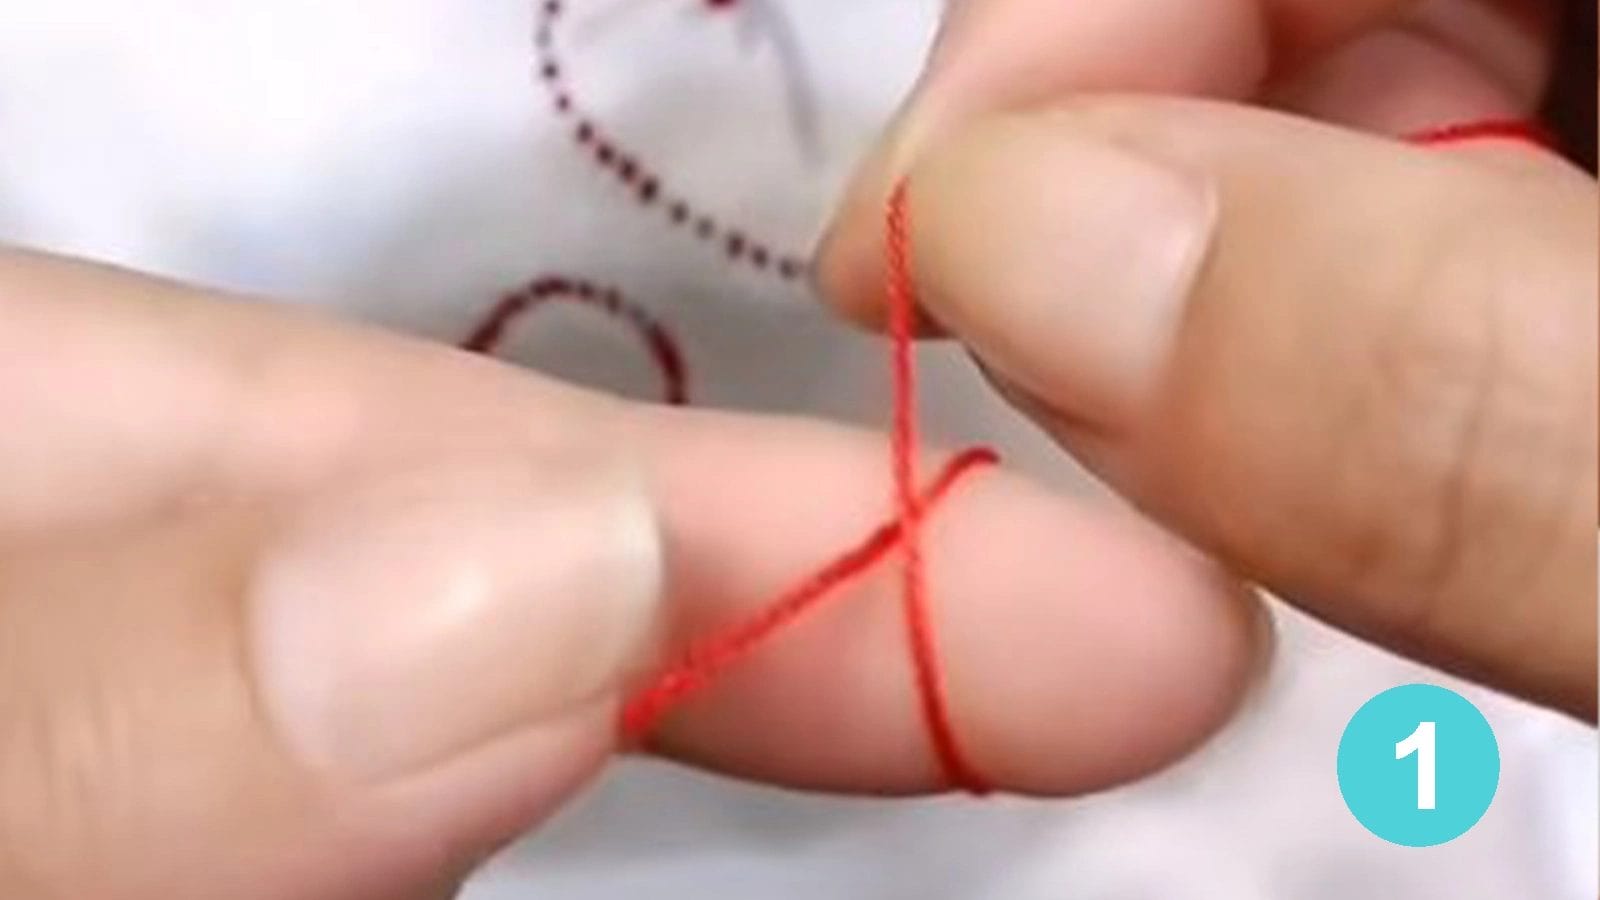 how to knot embroidery thread